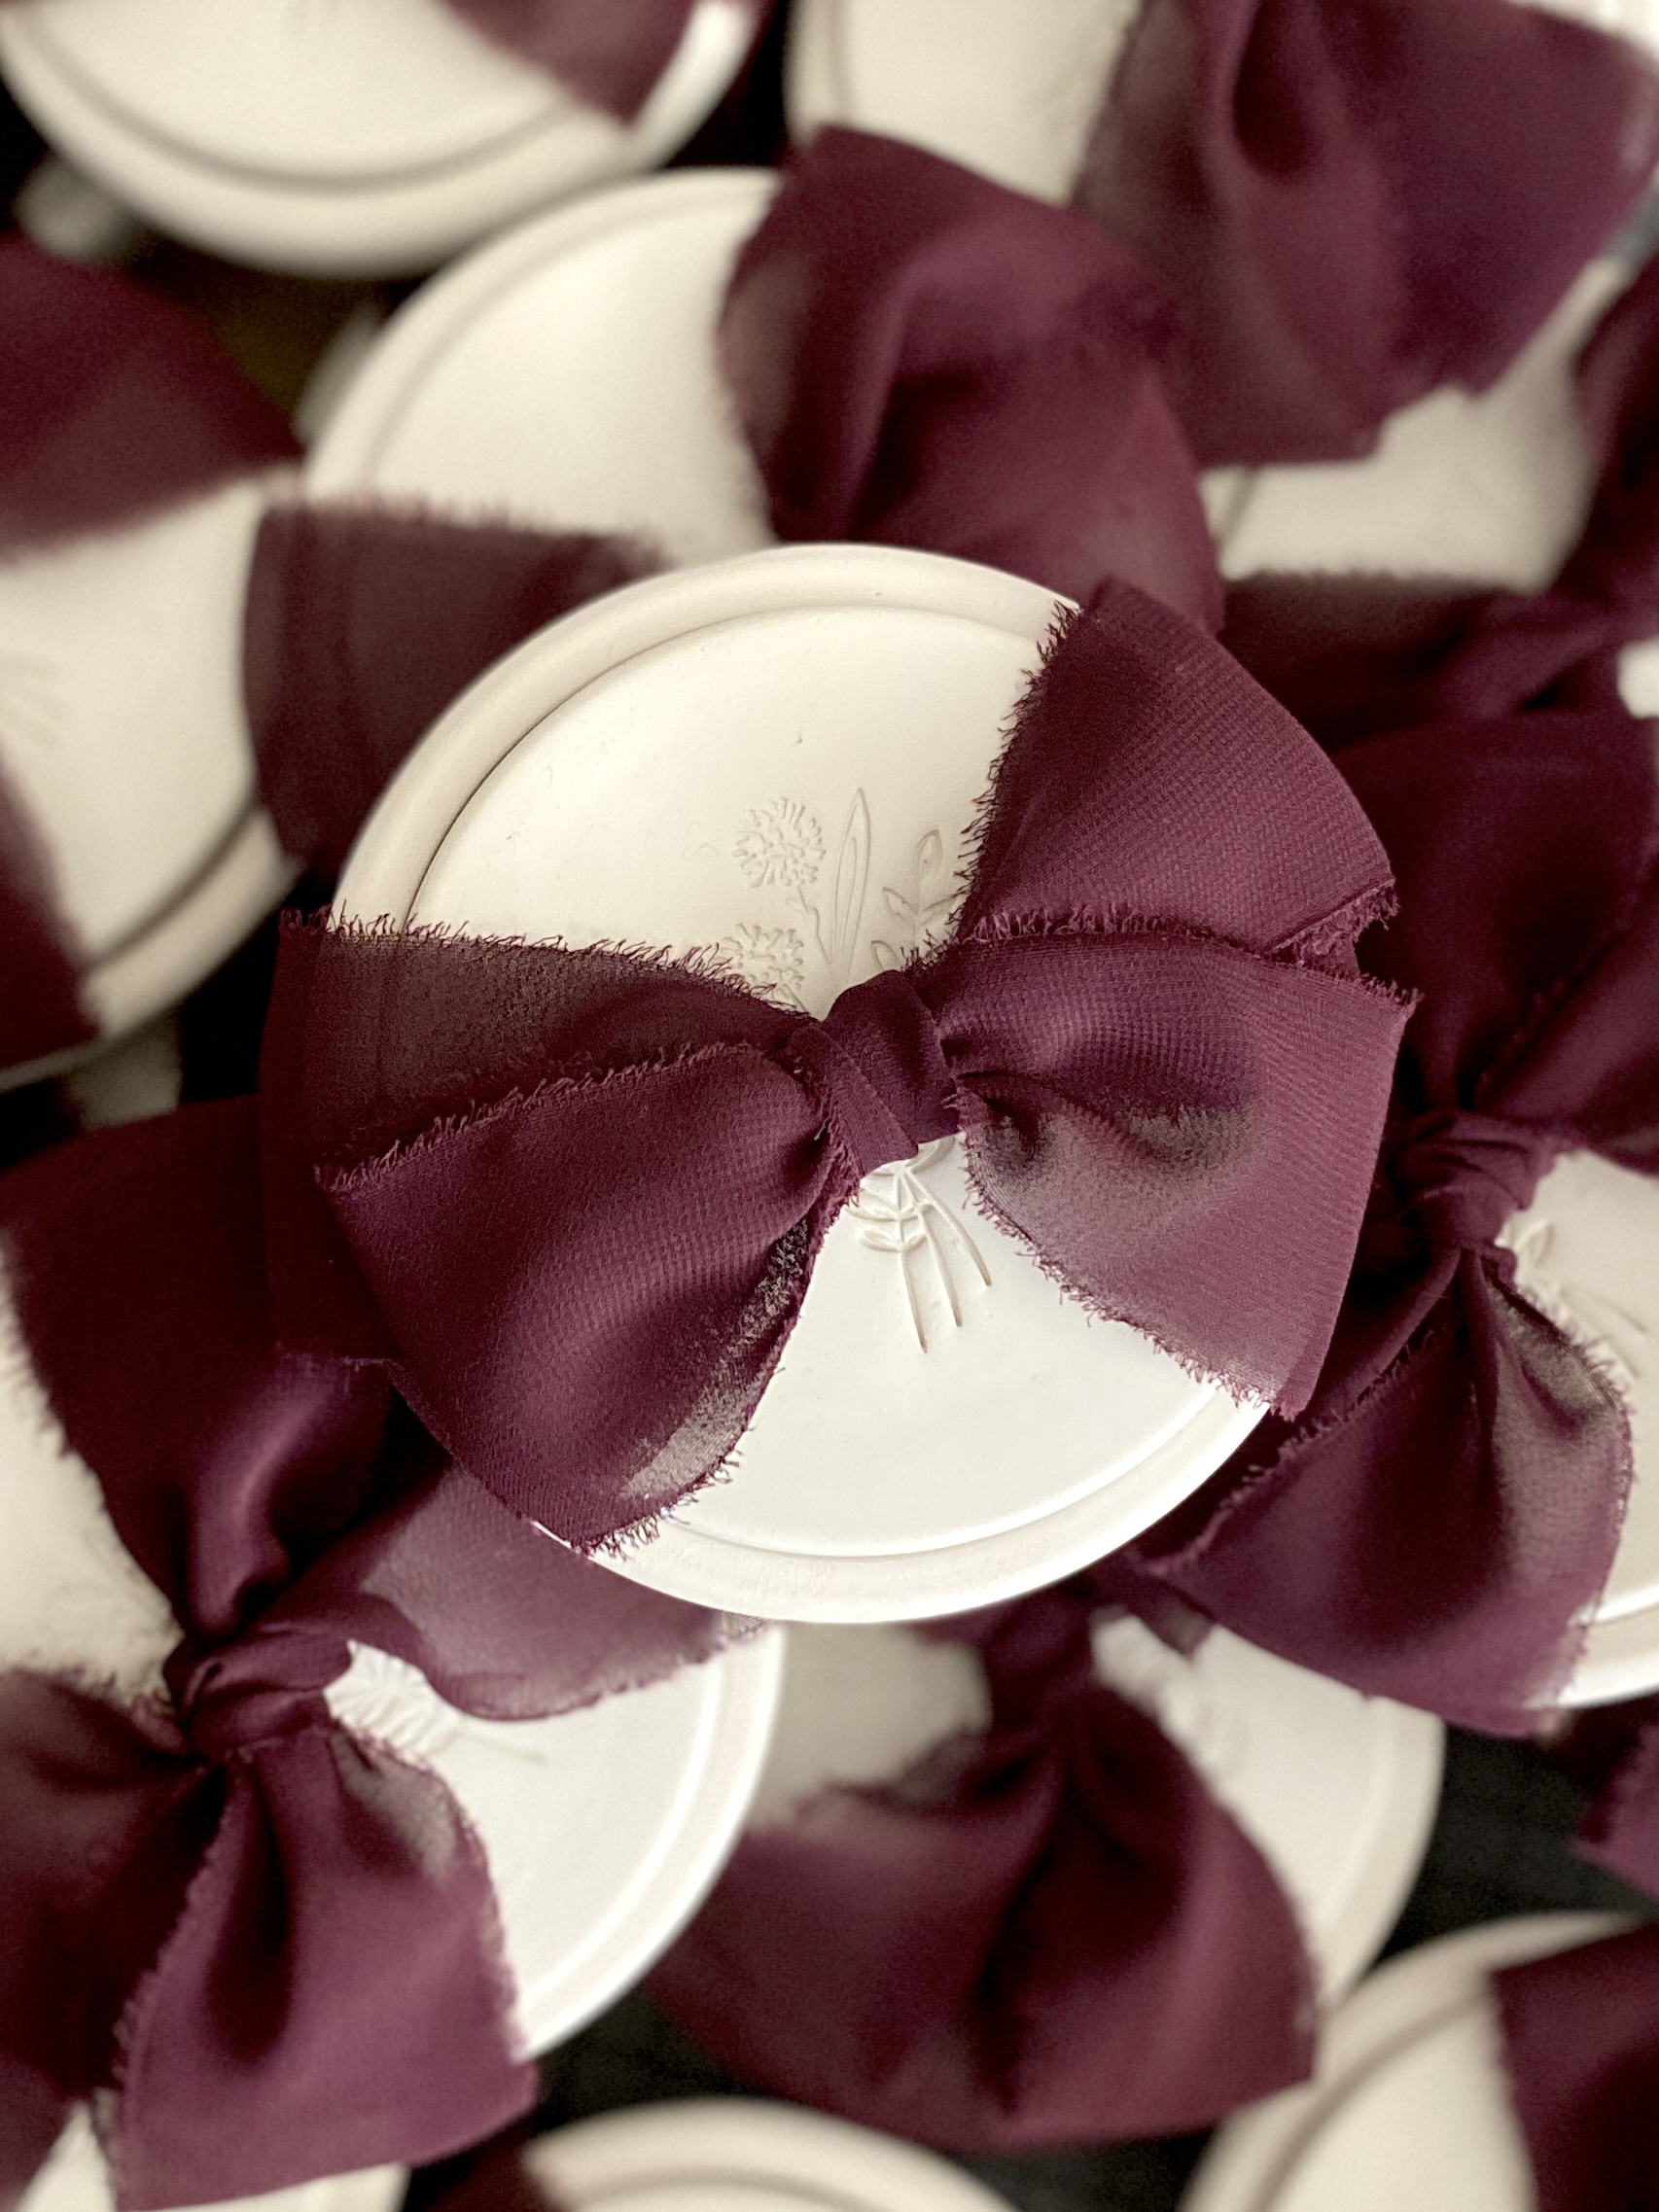 fall-wildflowers-wedding-favours-ceramic-eggplant-color-mouselin-ribbon